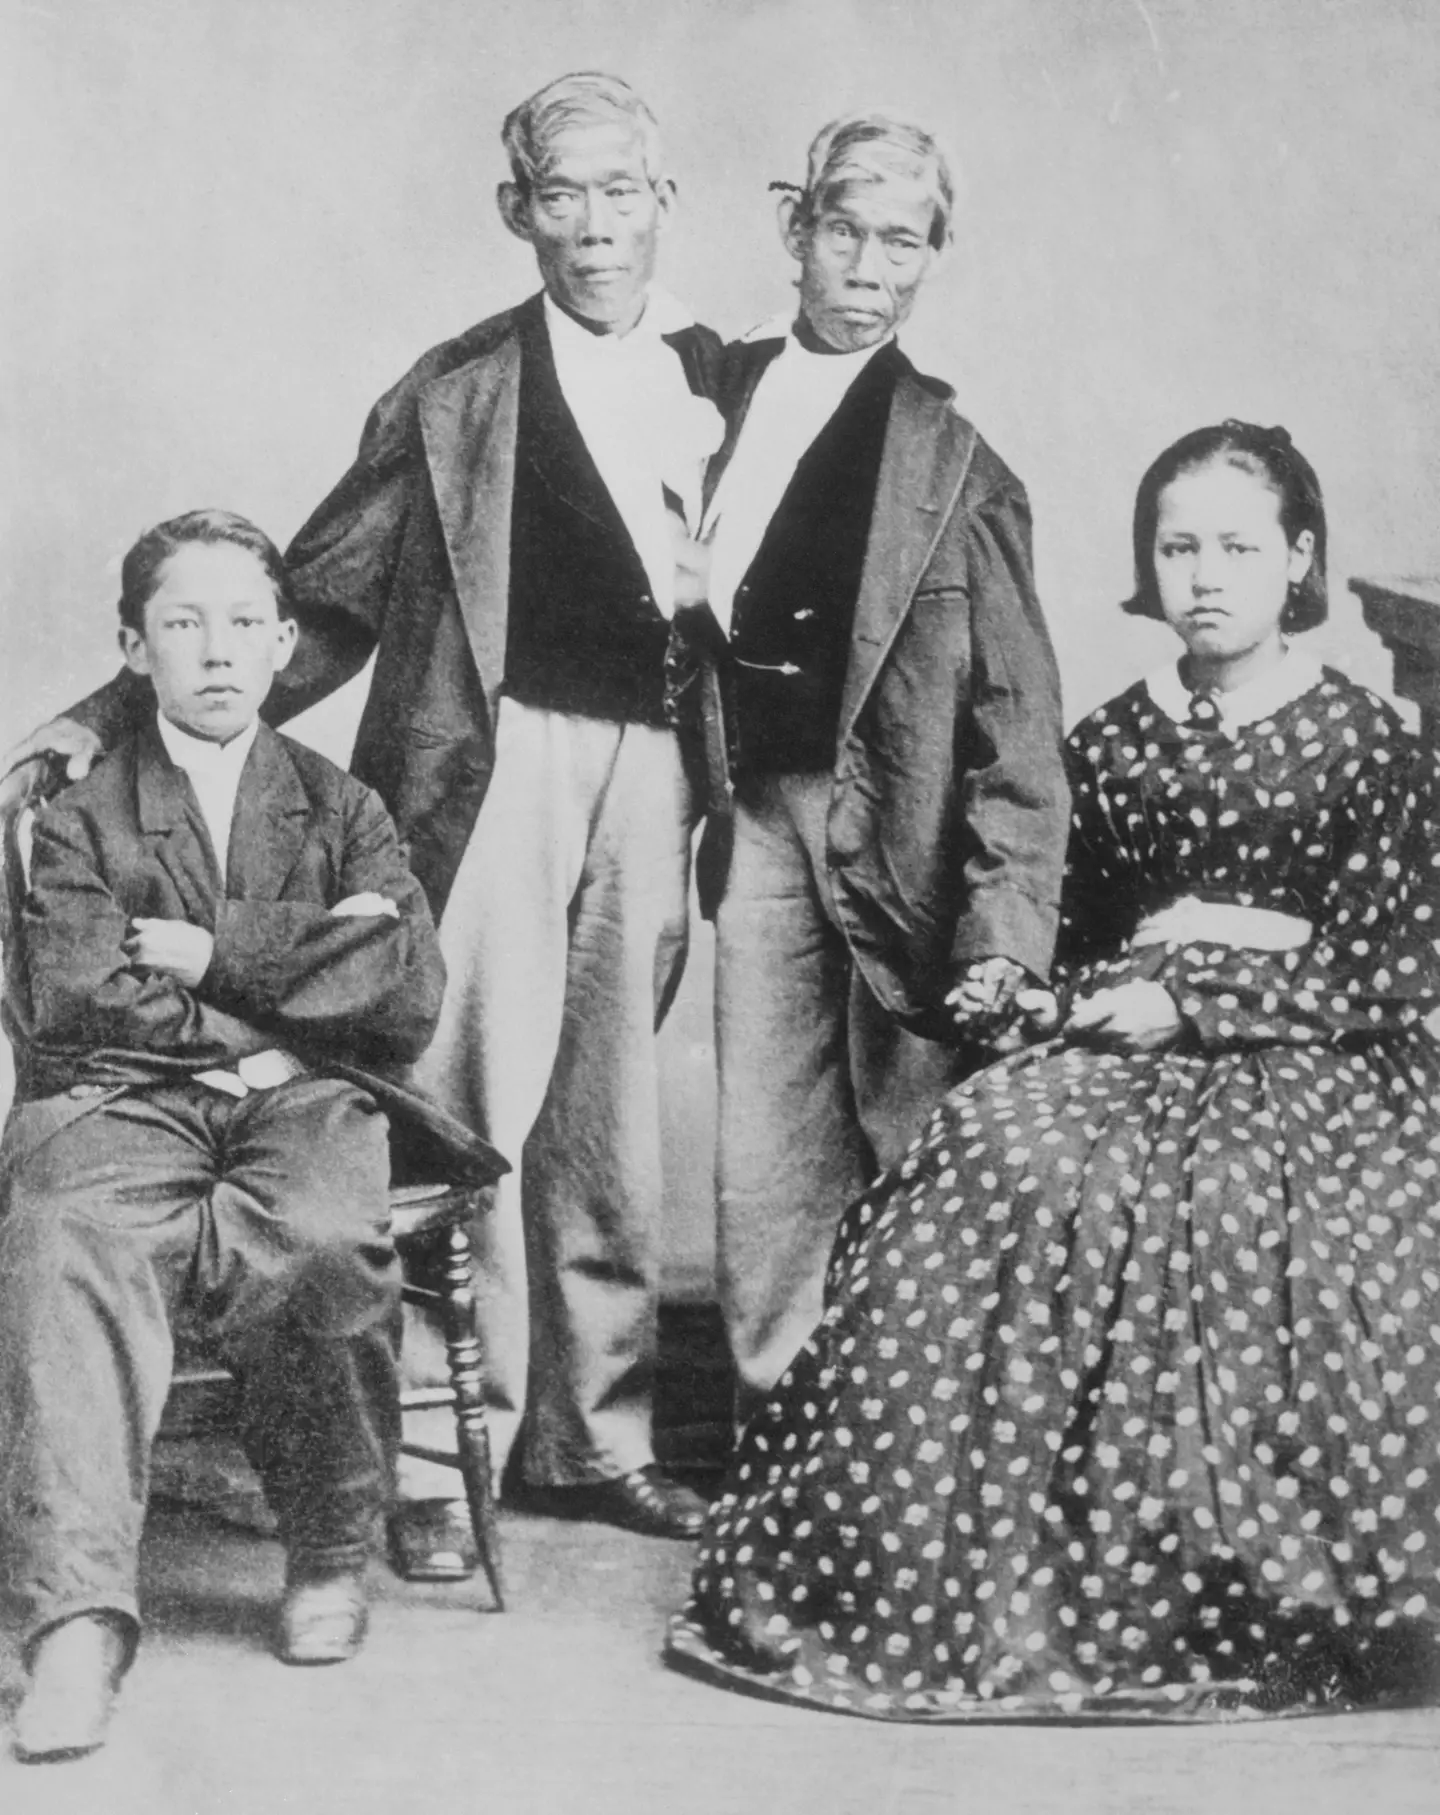 Chang and Eng with two of children.